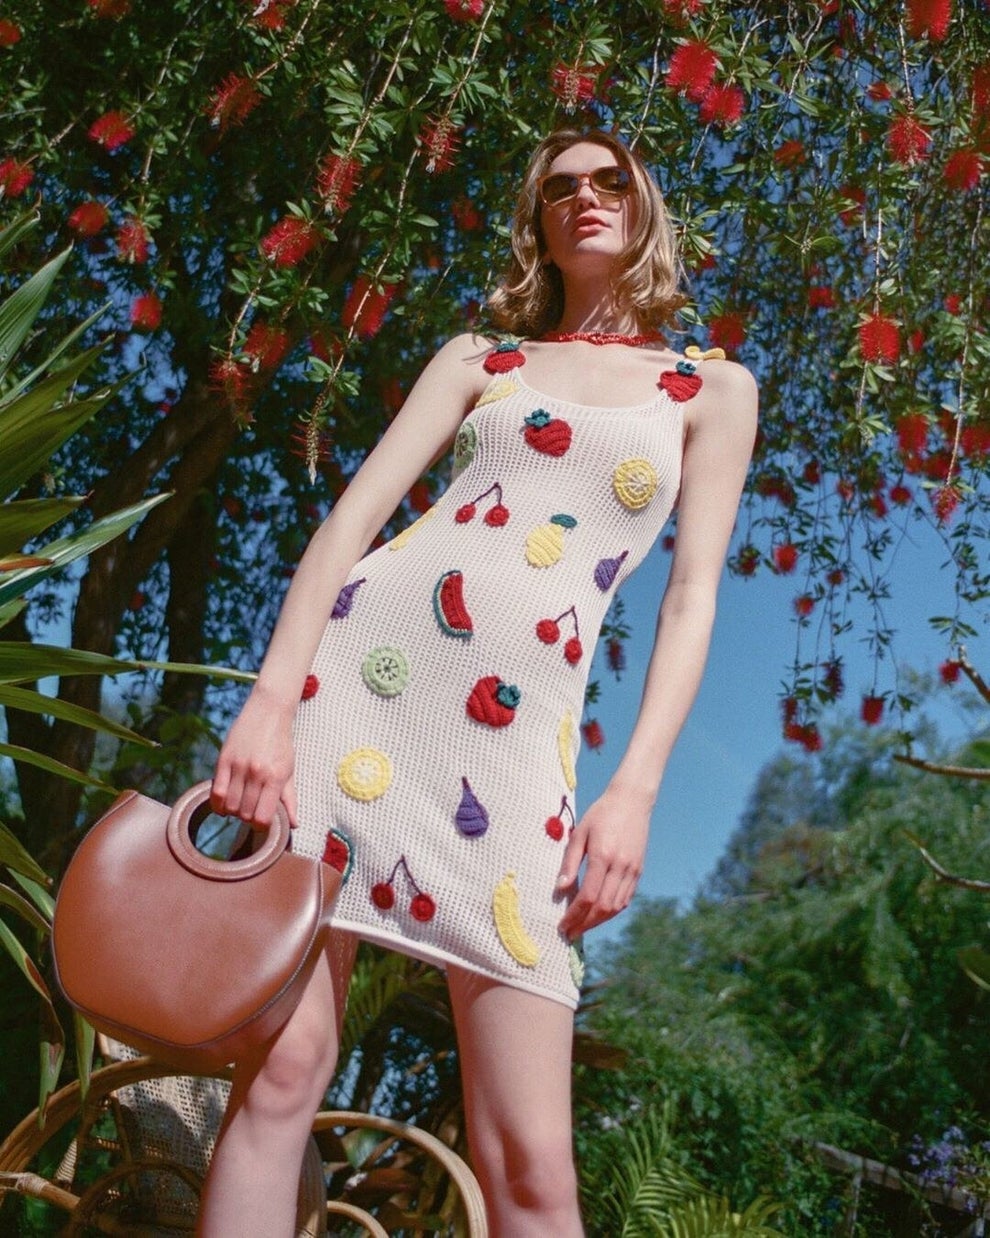 23 Things That’ll Basically Make You Look Like A Fruit Salad